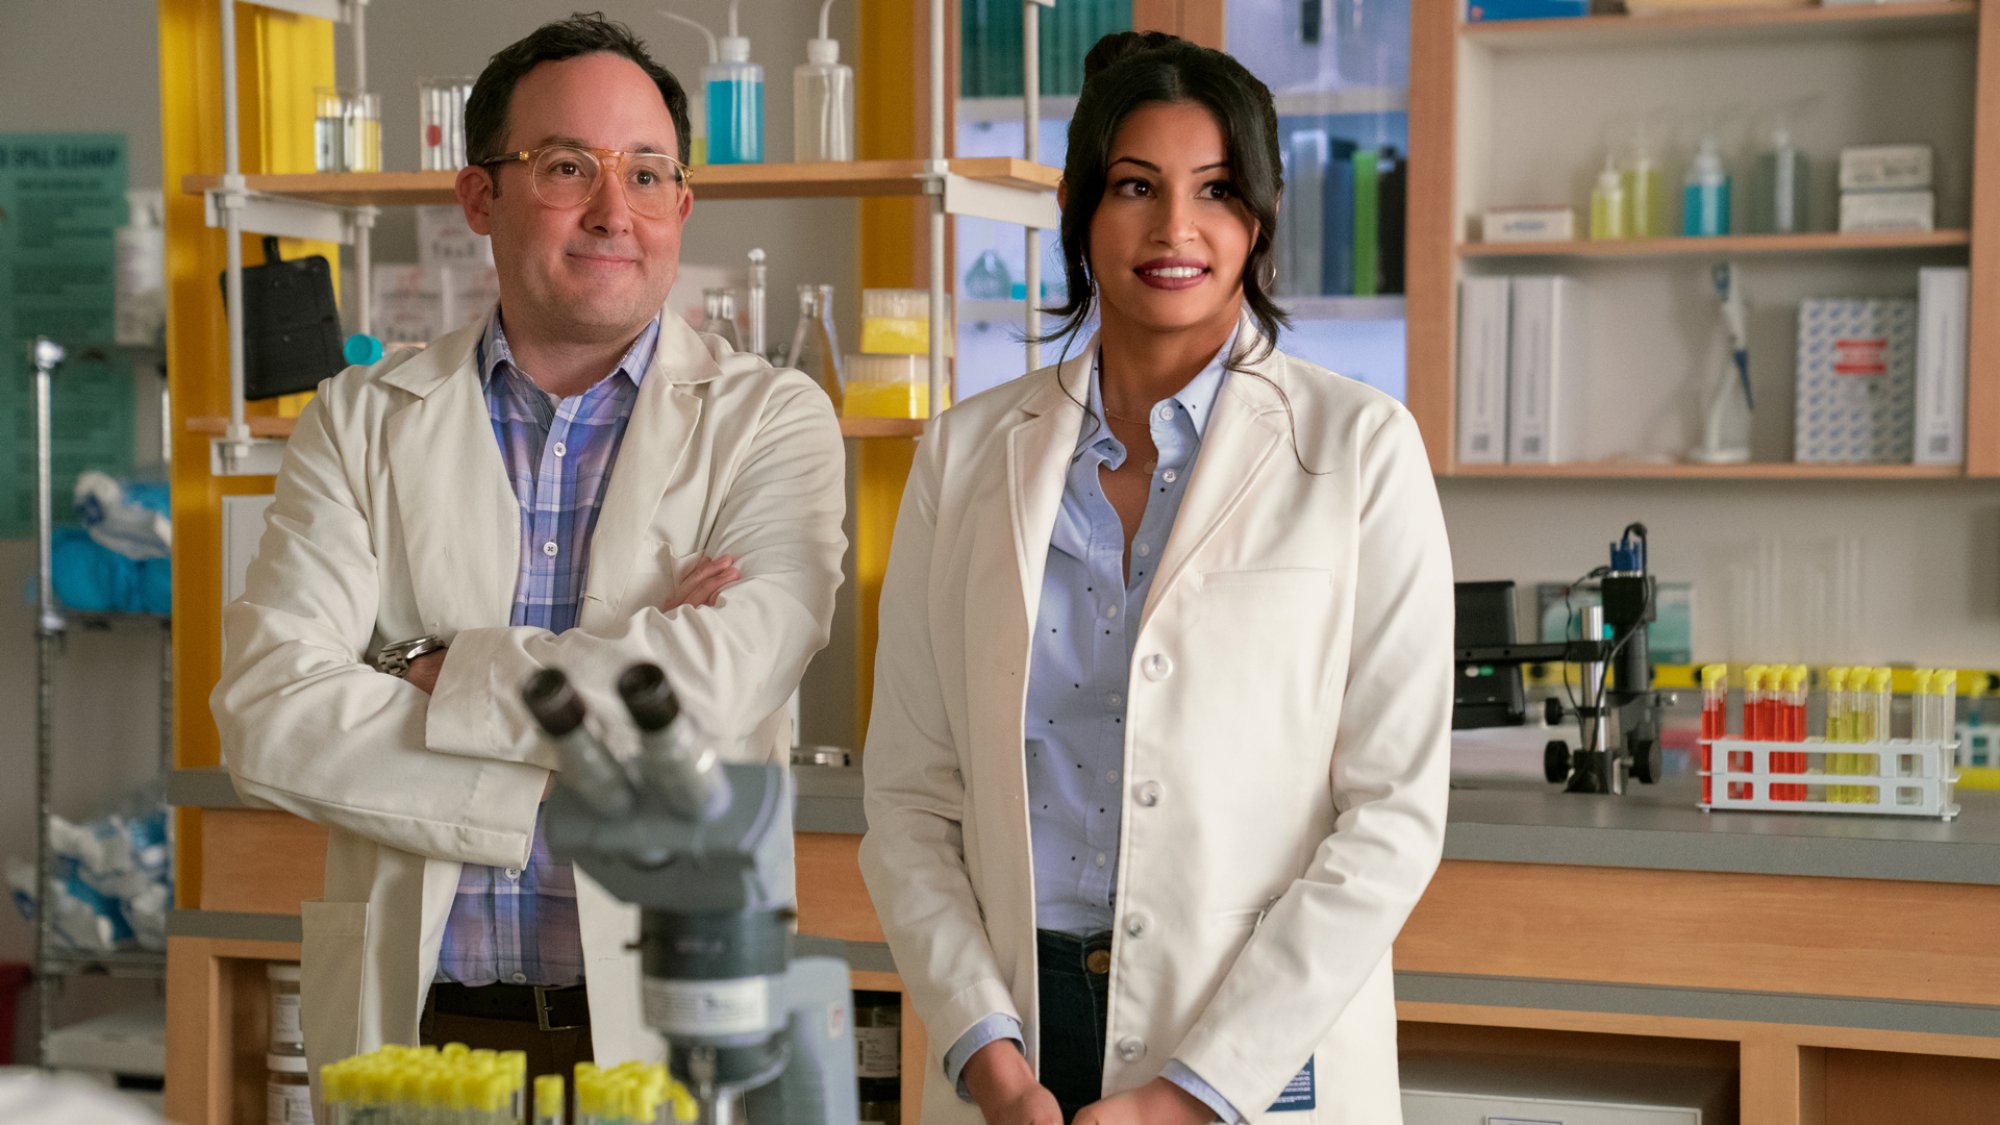 Two people in lab coats stand in a lab.